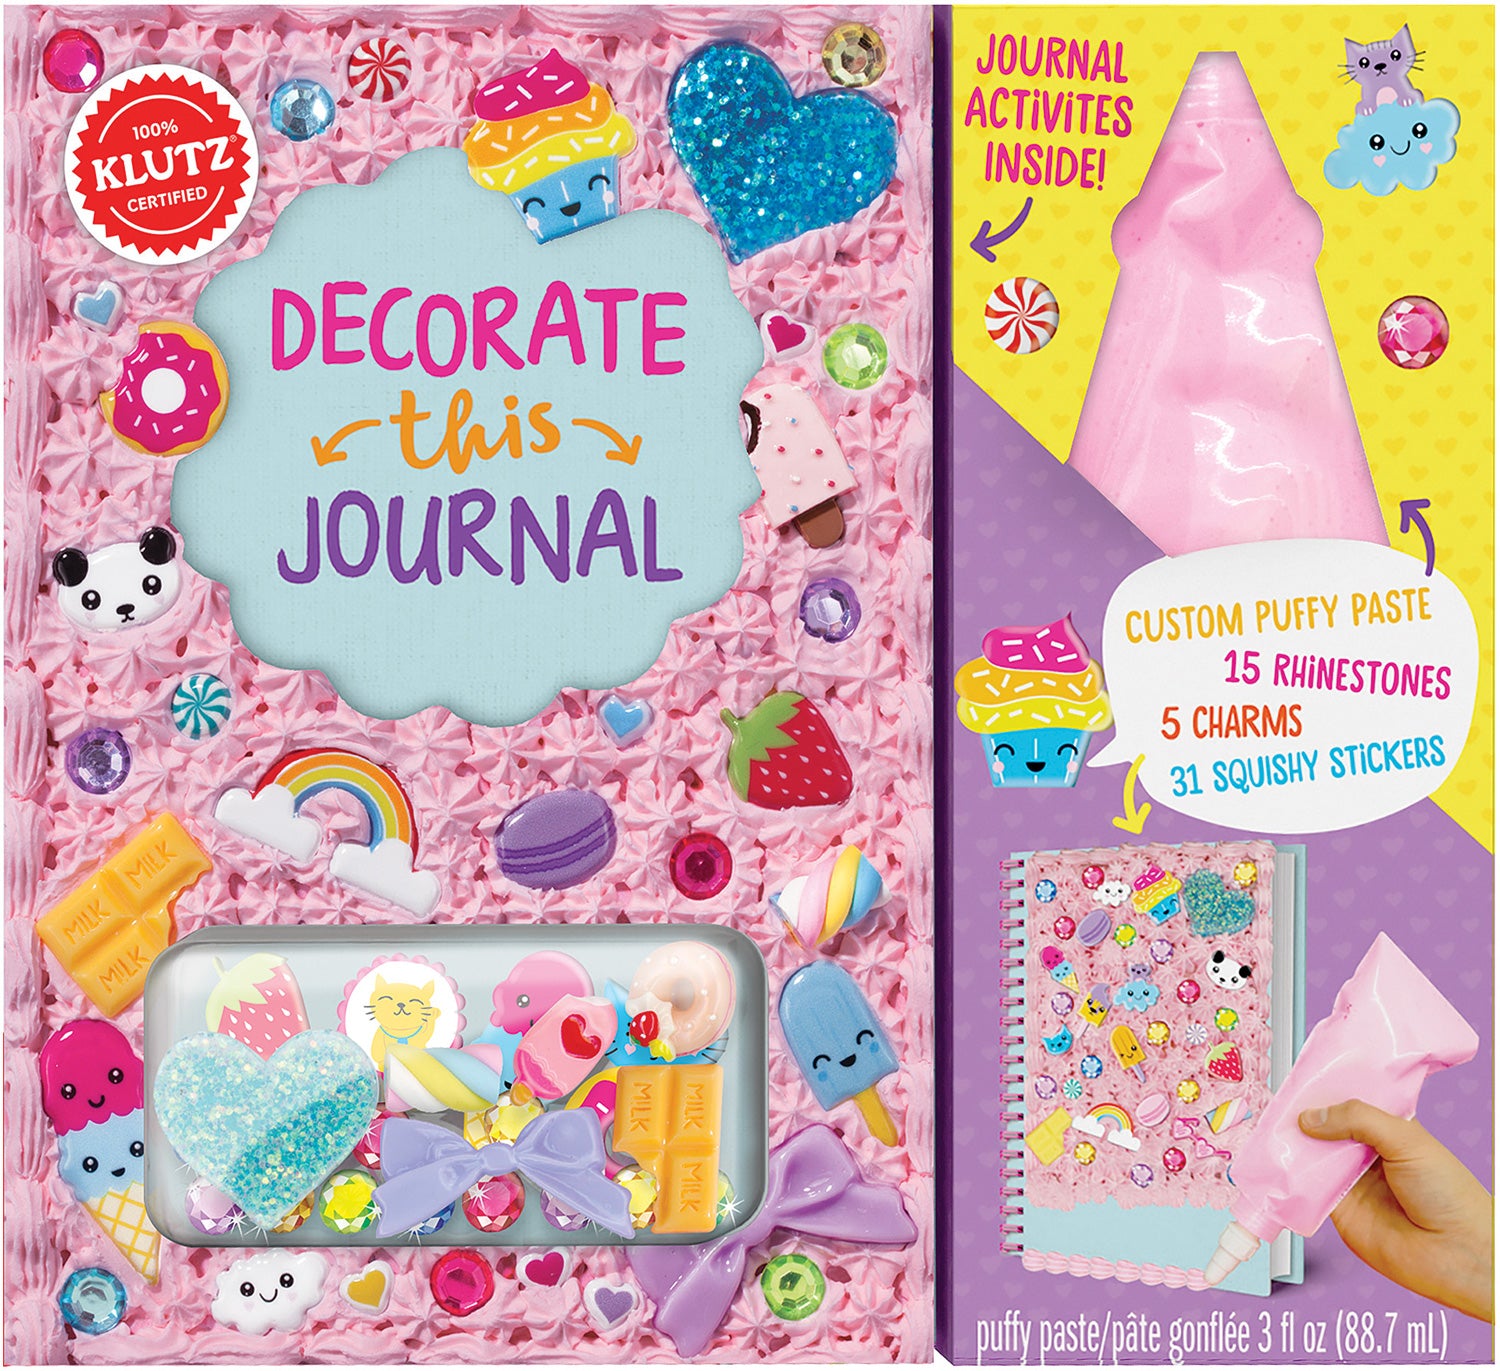 Decorate this Journal